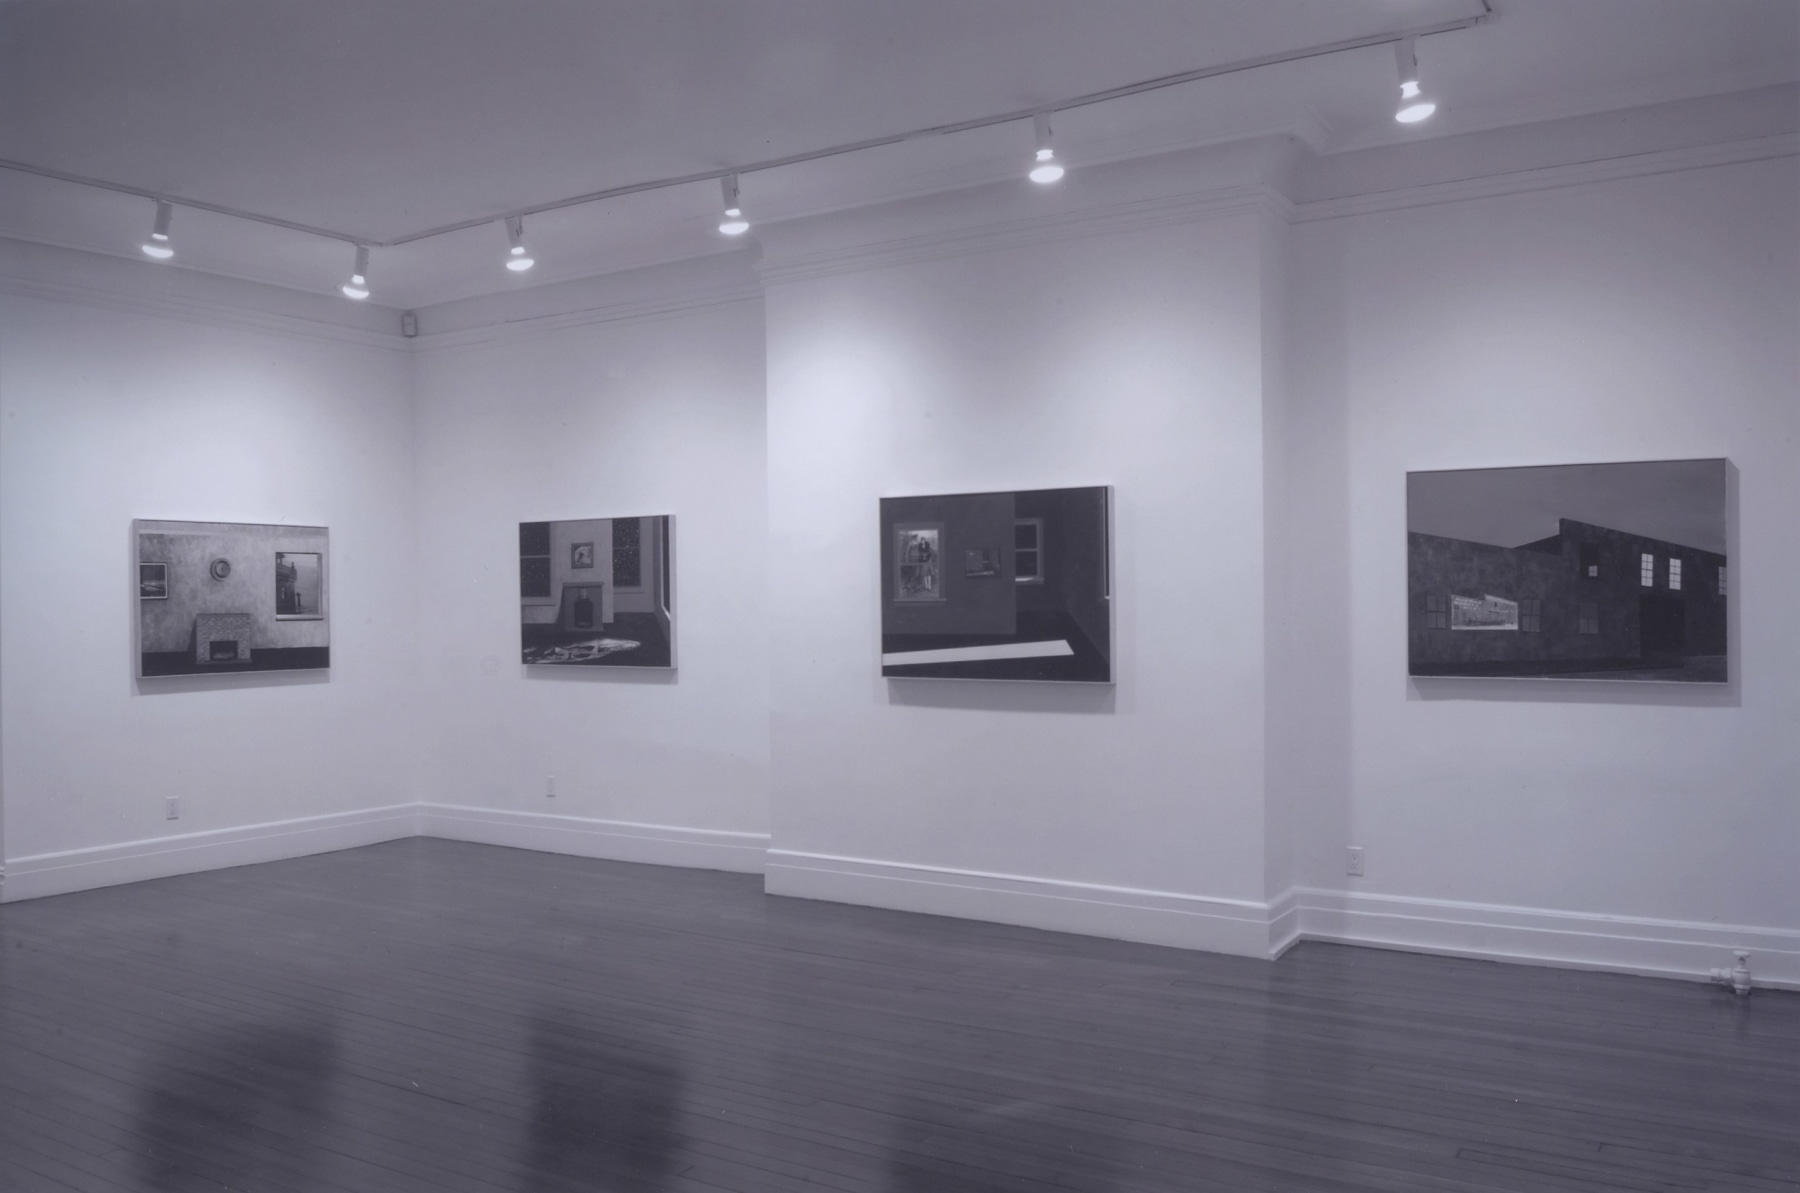 Installation view, Robert Morris: Waxing Time, Waning Light: New Paintings, 18 EAST 77